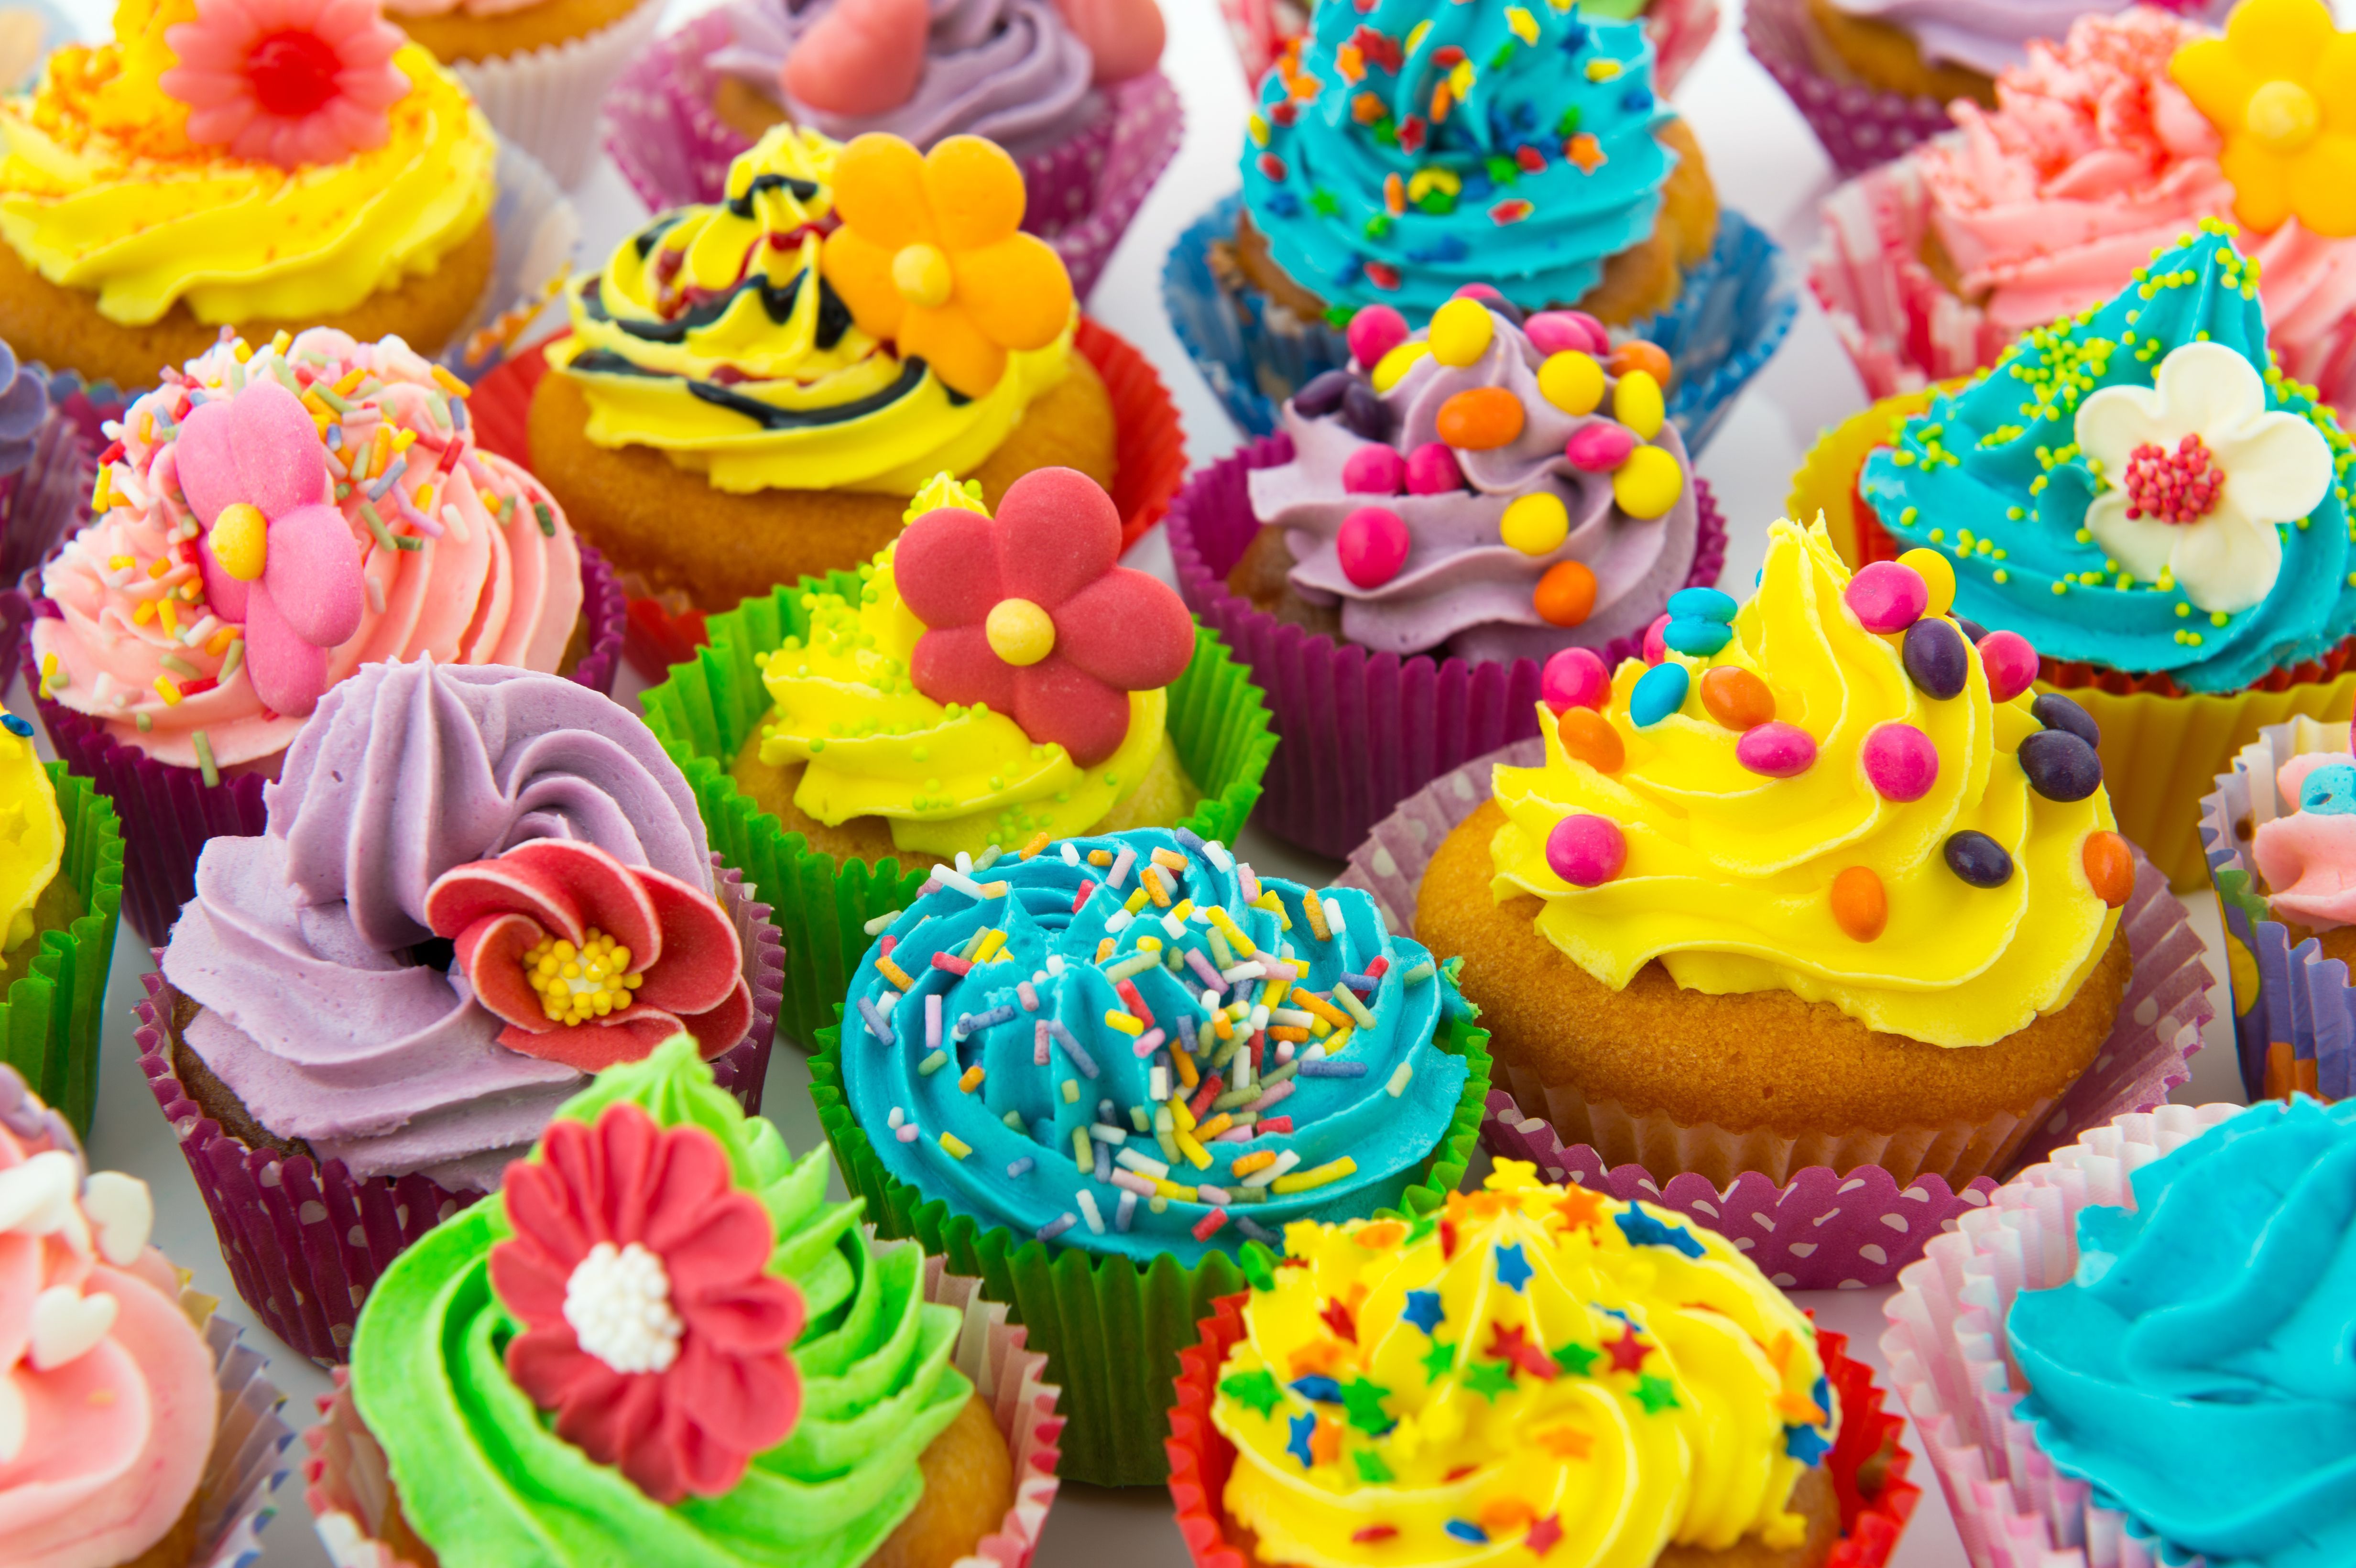 Colorful Cupcakes Wallpaper Free Colorful Cupcakes Background